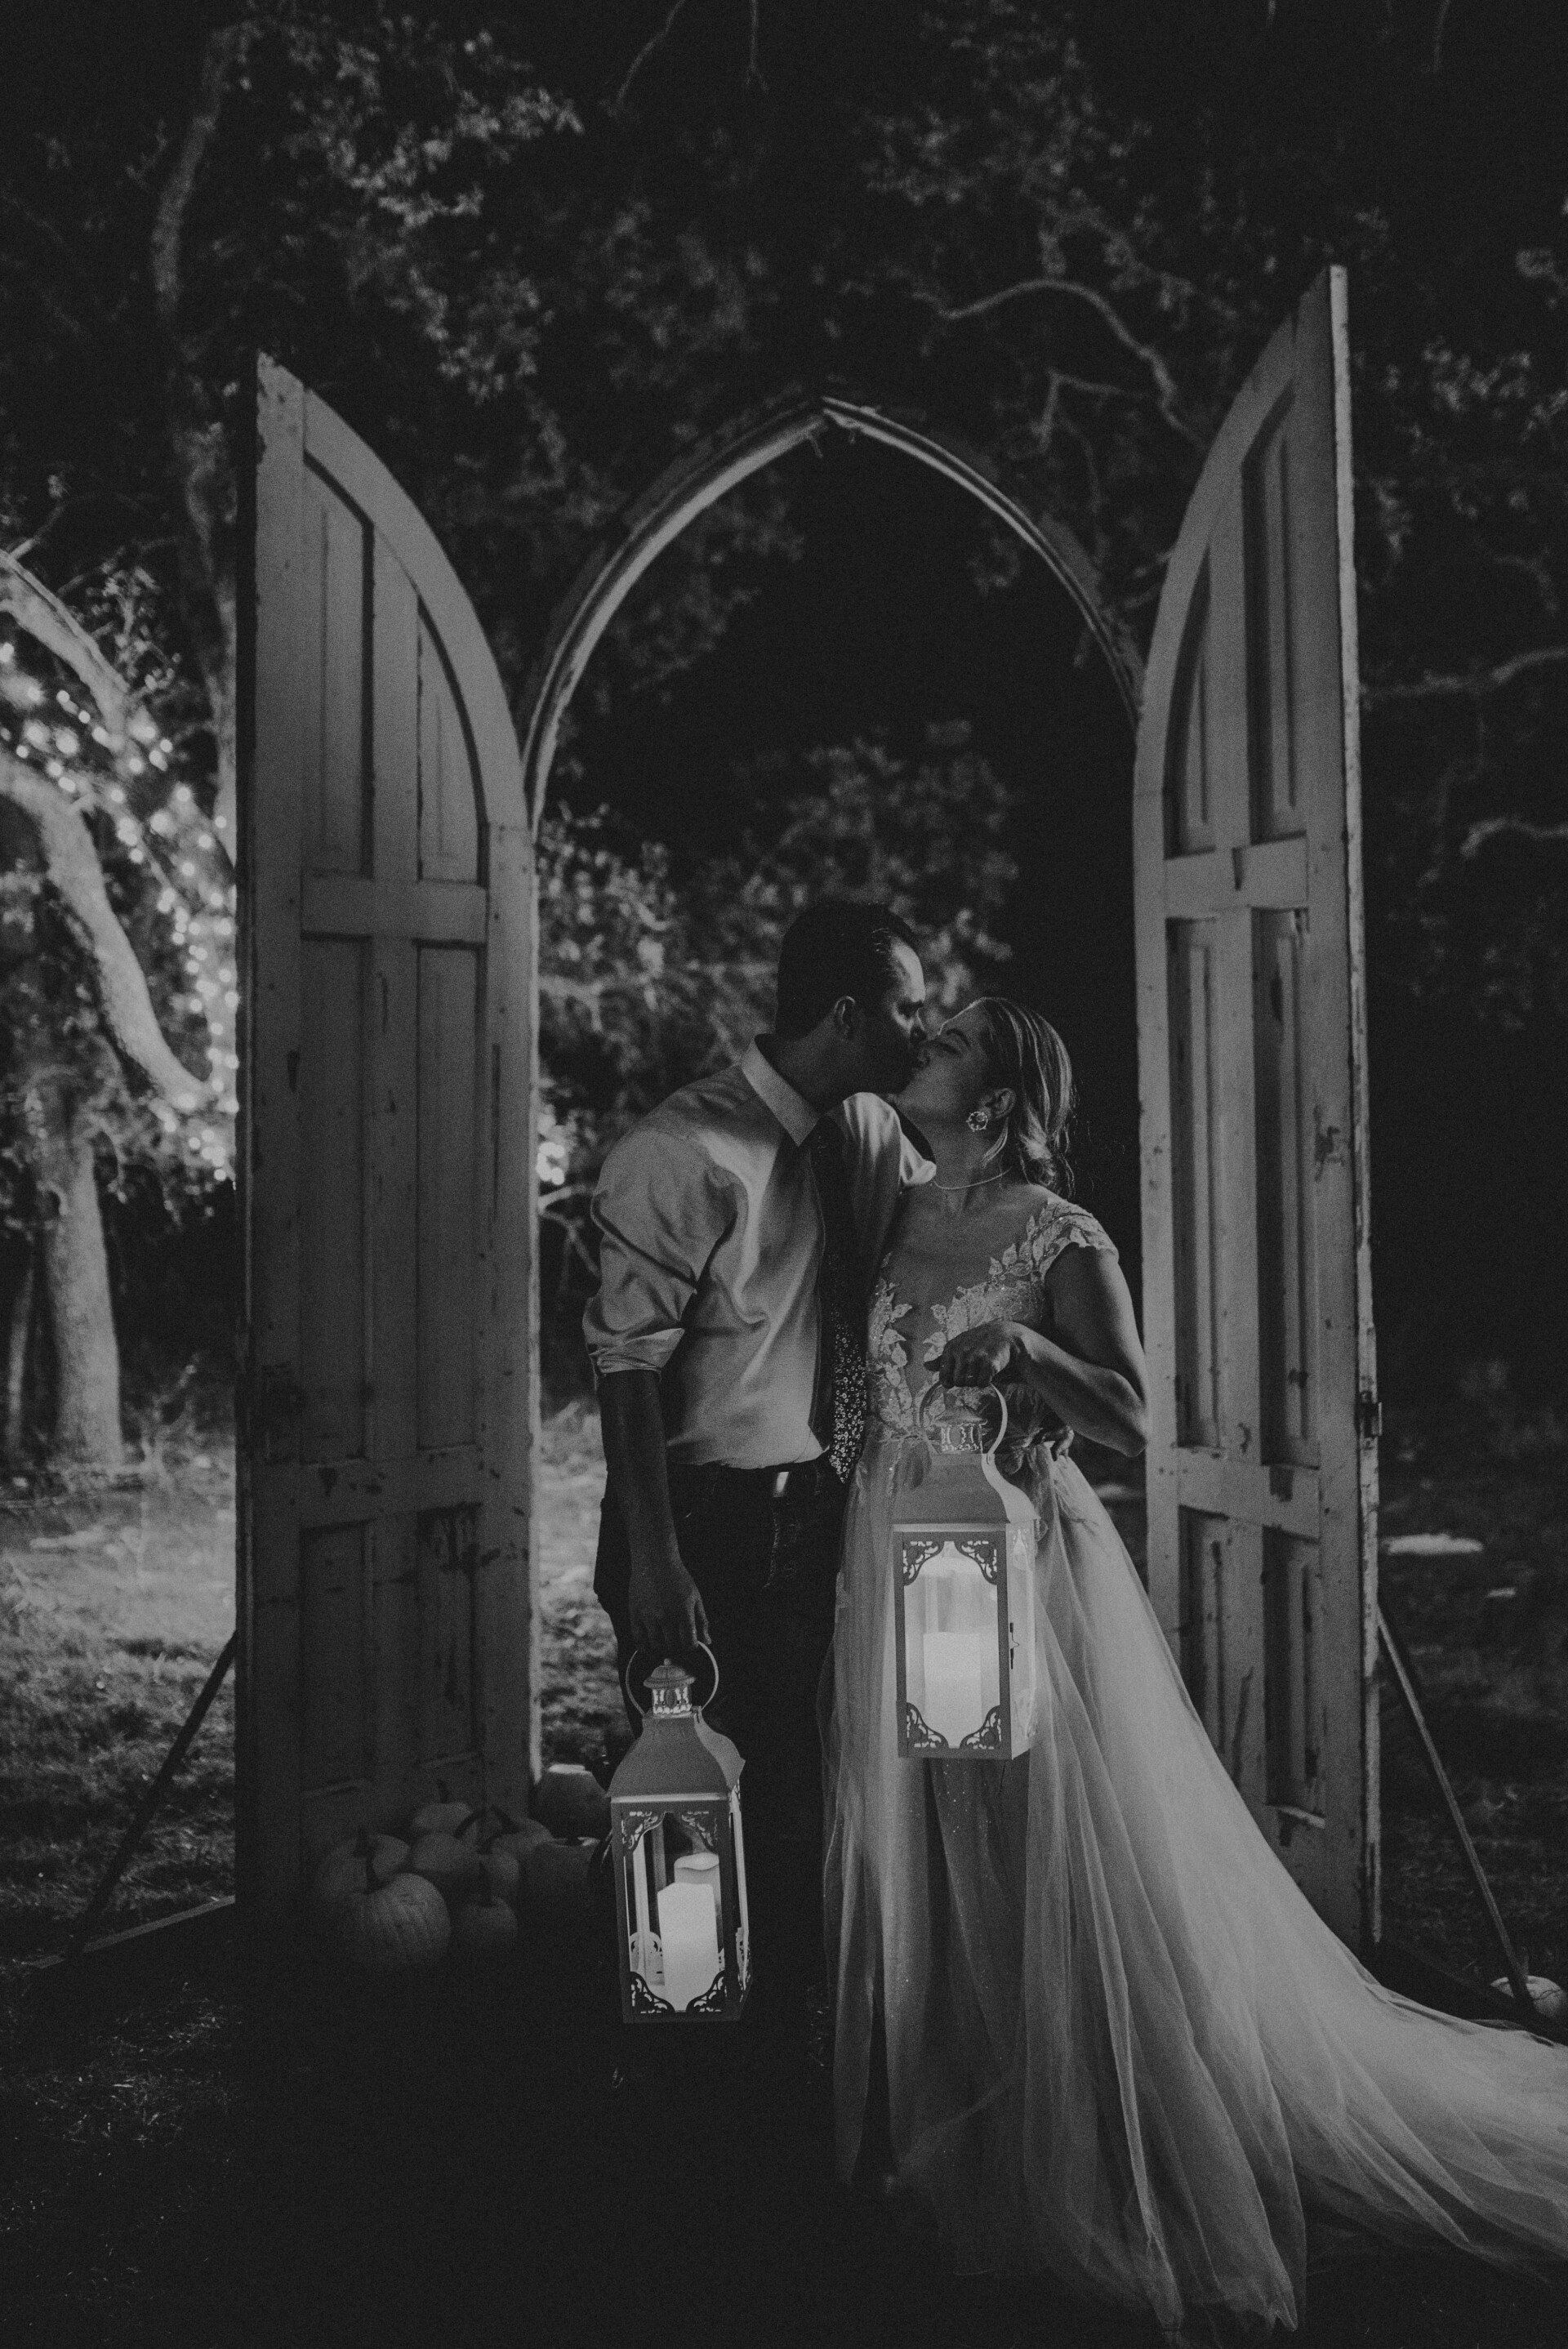 a black and white photo of a bride and groom holding lanterns